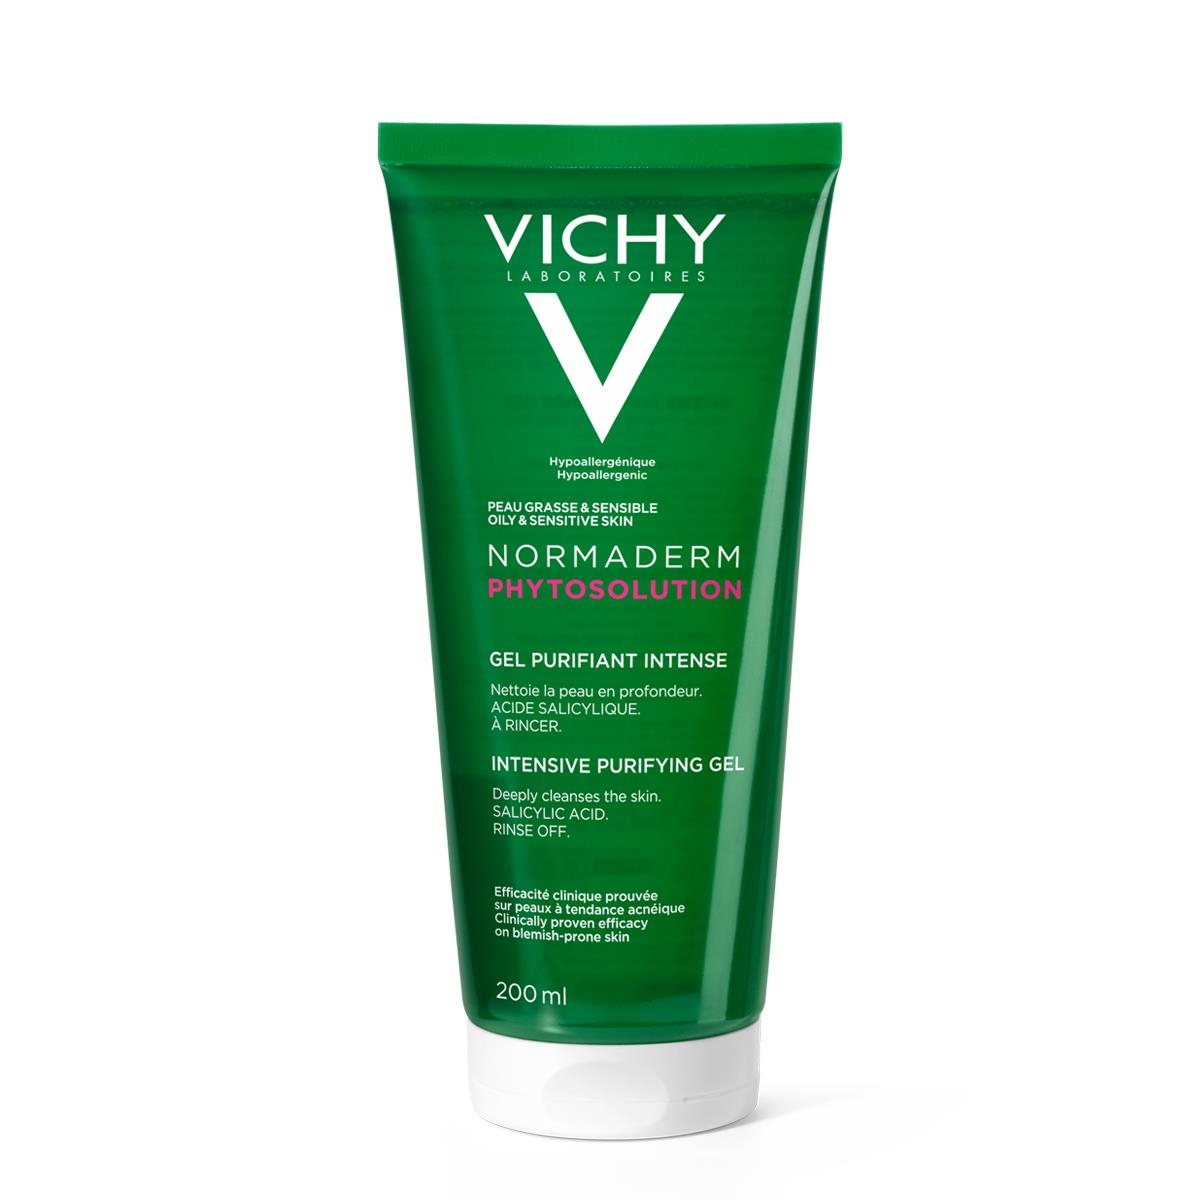 Vichy Normaderm Phytosolution 200 мл Очищающий гель vichy очищающий гель для умывания normaderm phytosolution 200 мл